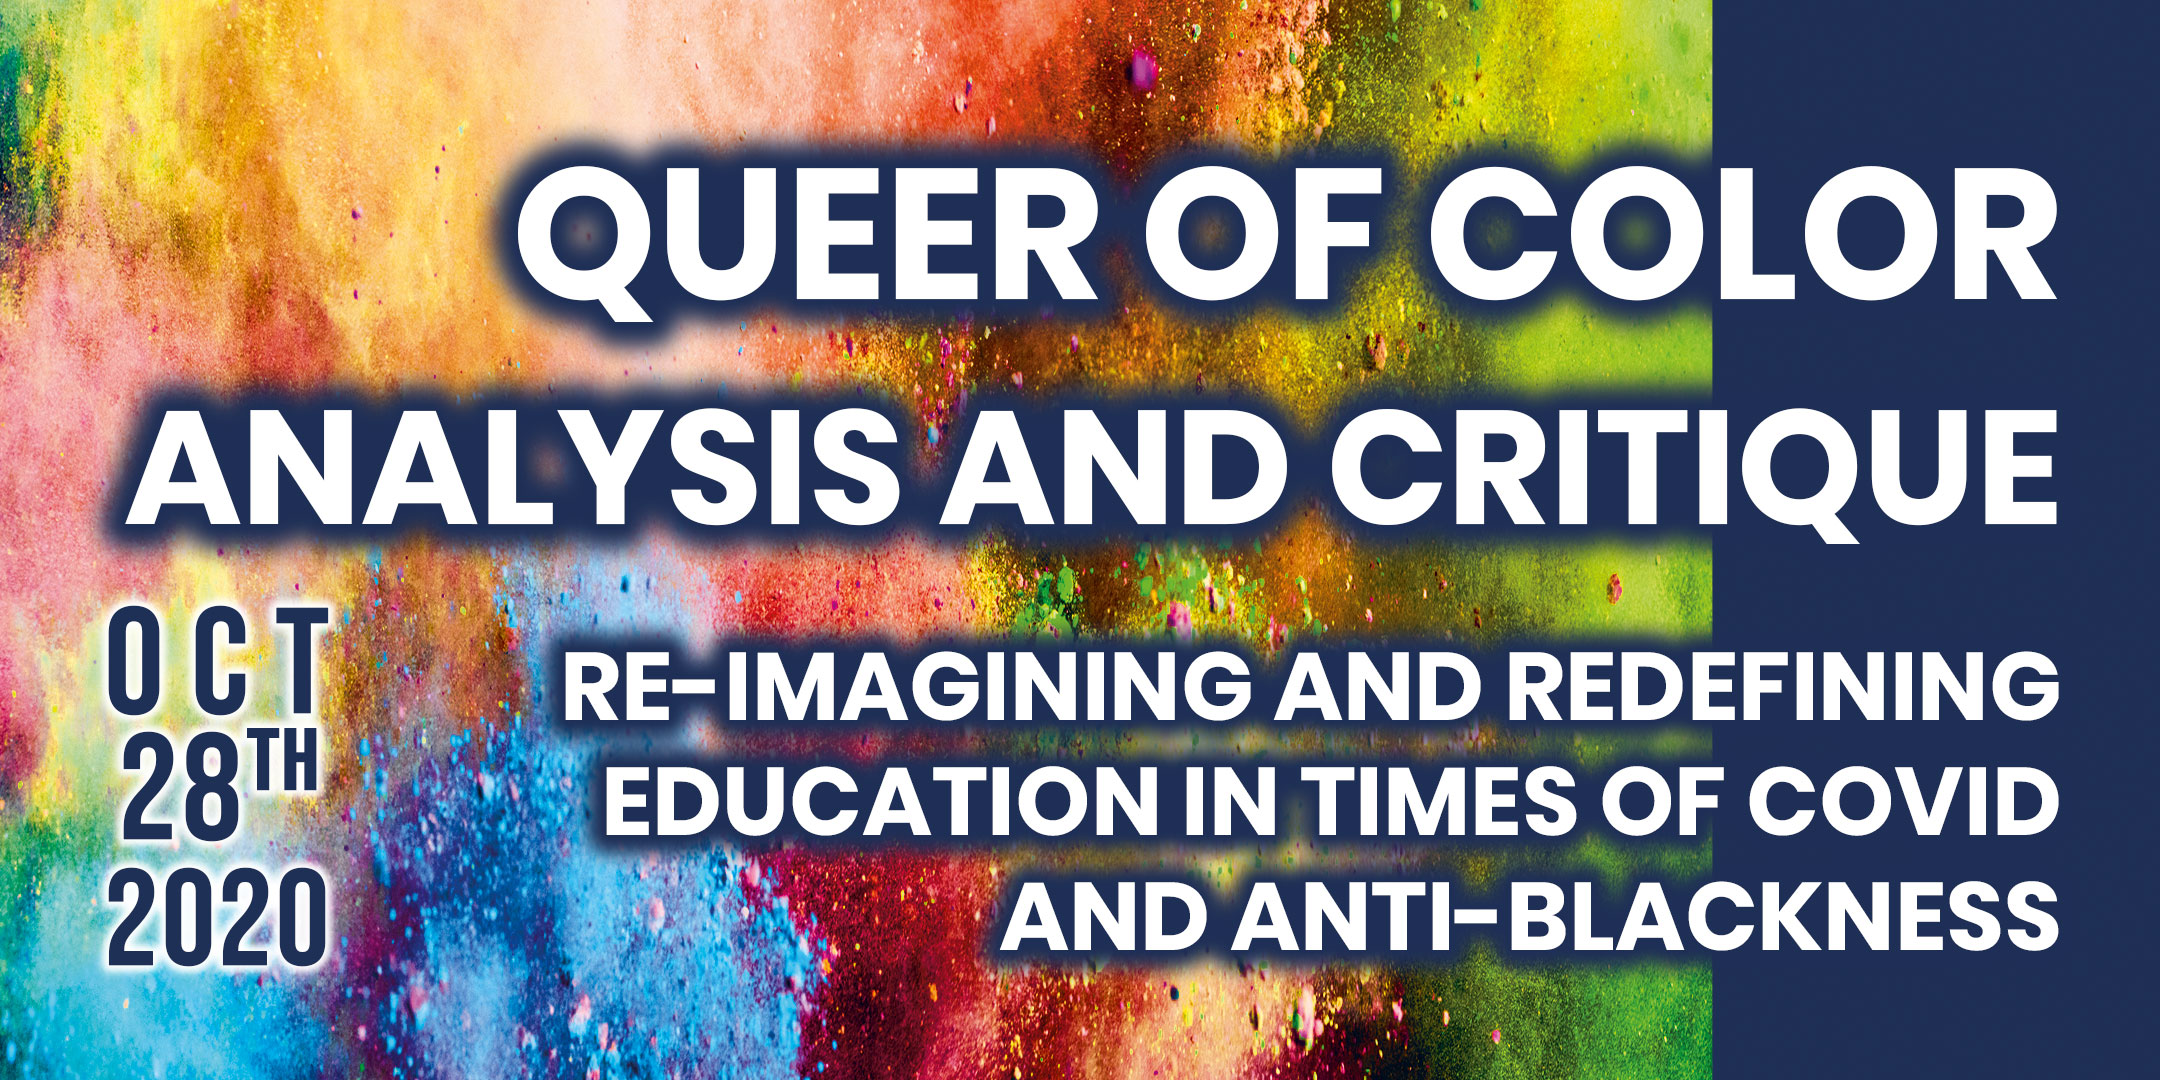 QOCAERI: Re-imagining and Redefining Education in Times of COVID and Anti-Blackness